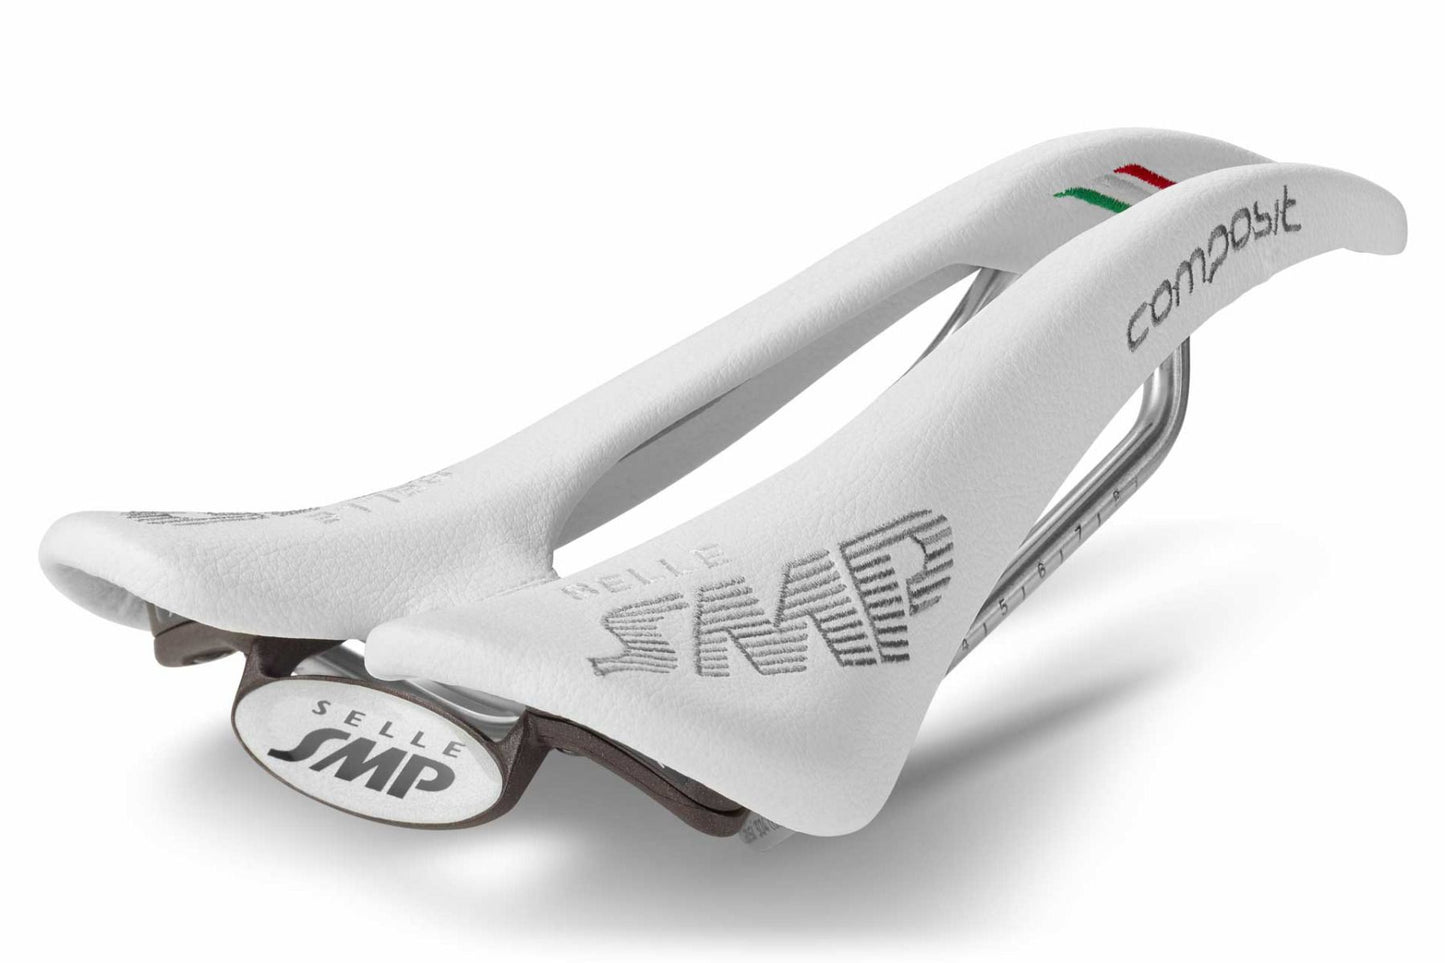 Selle SMP Composit Saddle with Steel Rails (White)